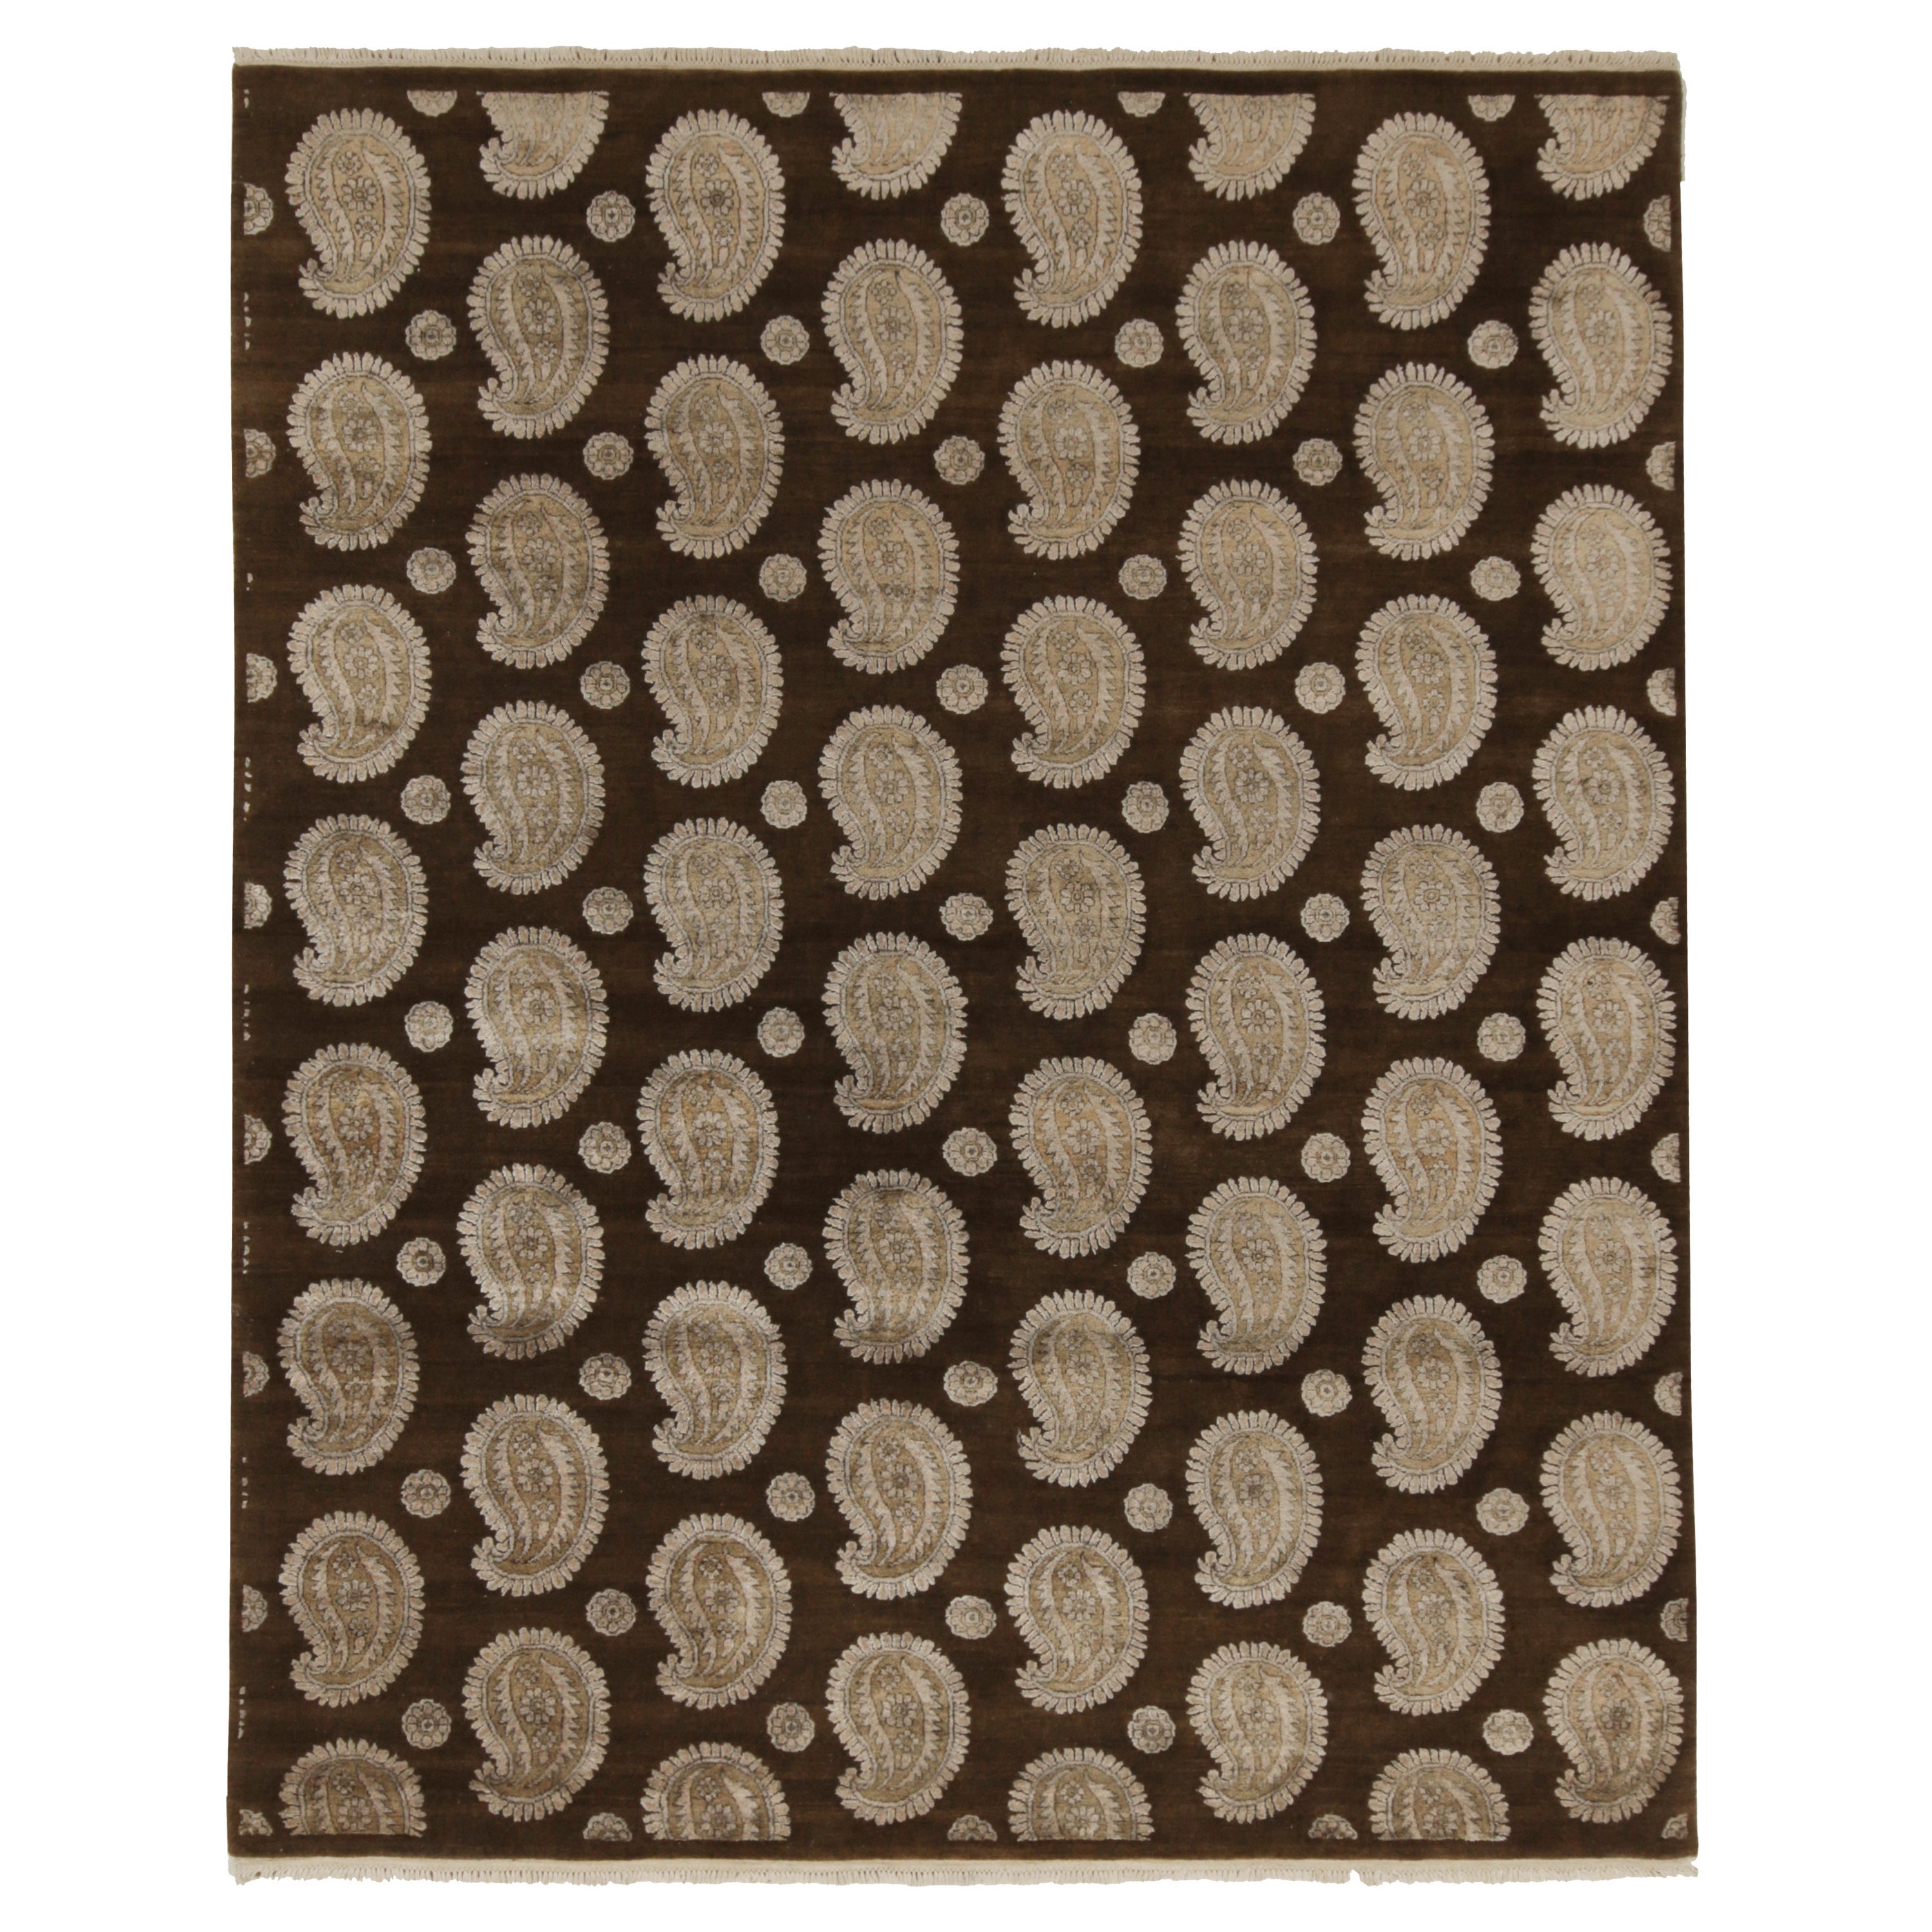 Rug & Kilim’s Classic Style Rug in Brown with Ivory Paisley Patterns For Sale